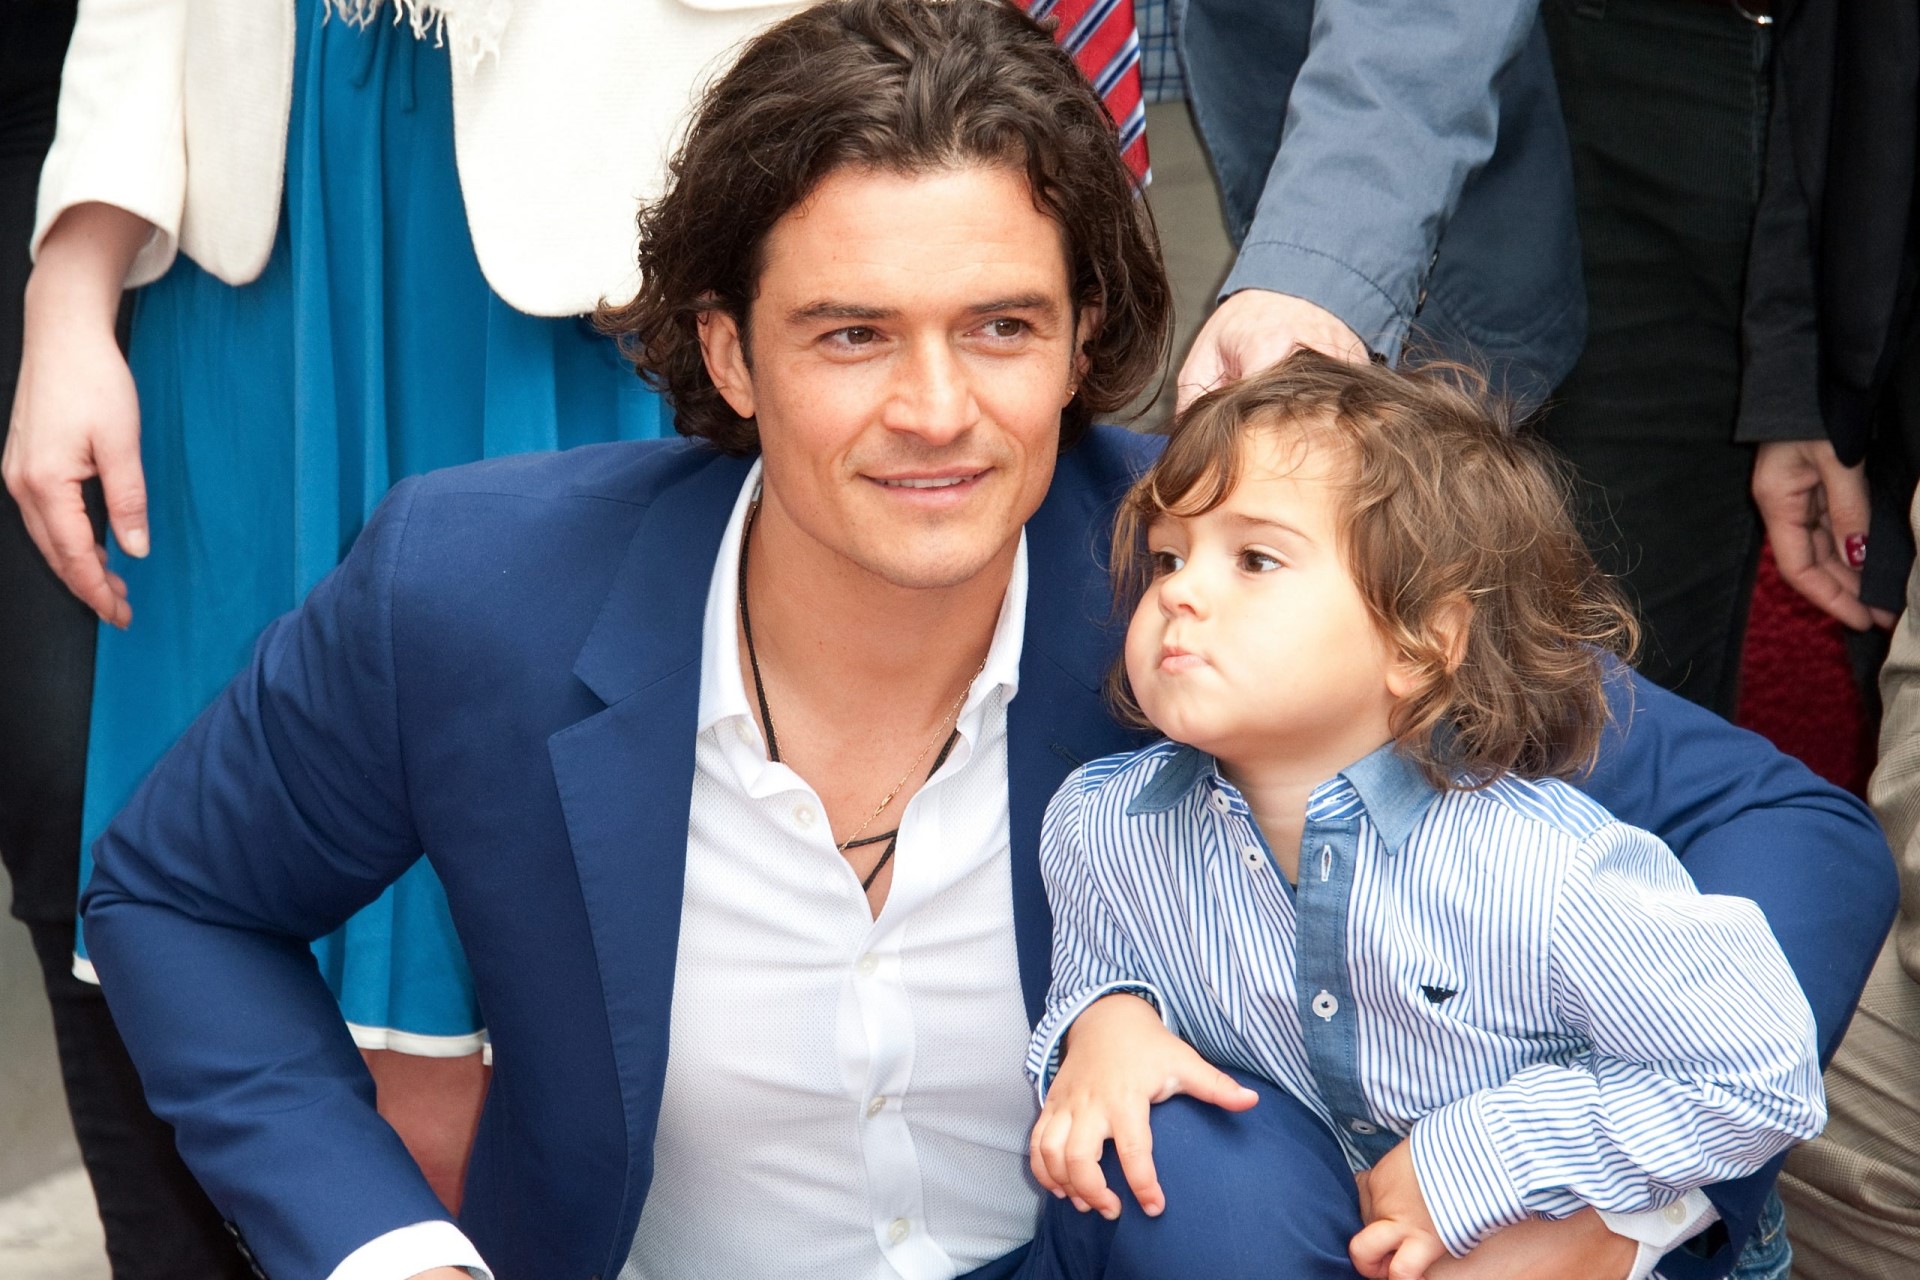 Orlando Bloom and other cute dads